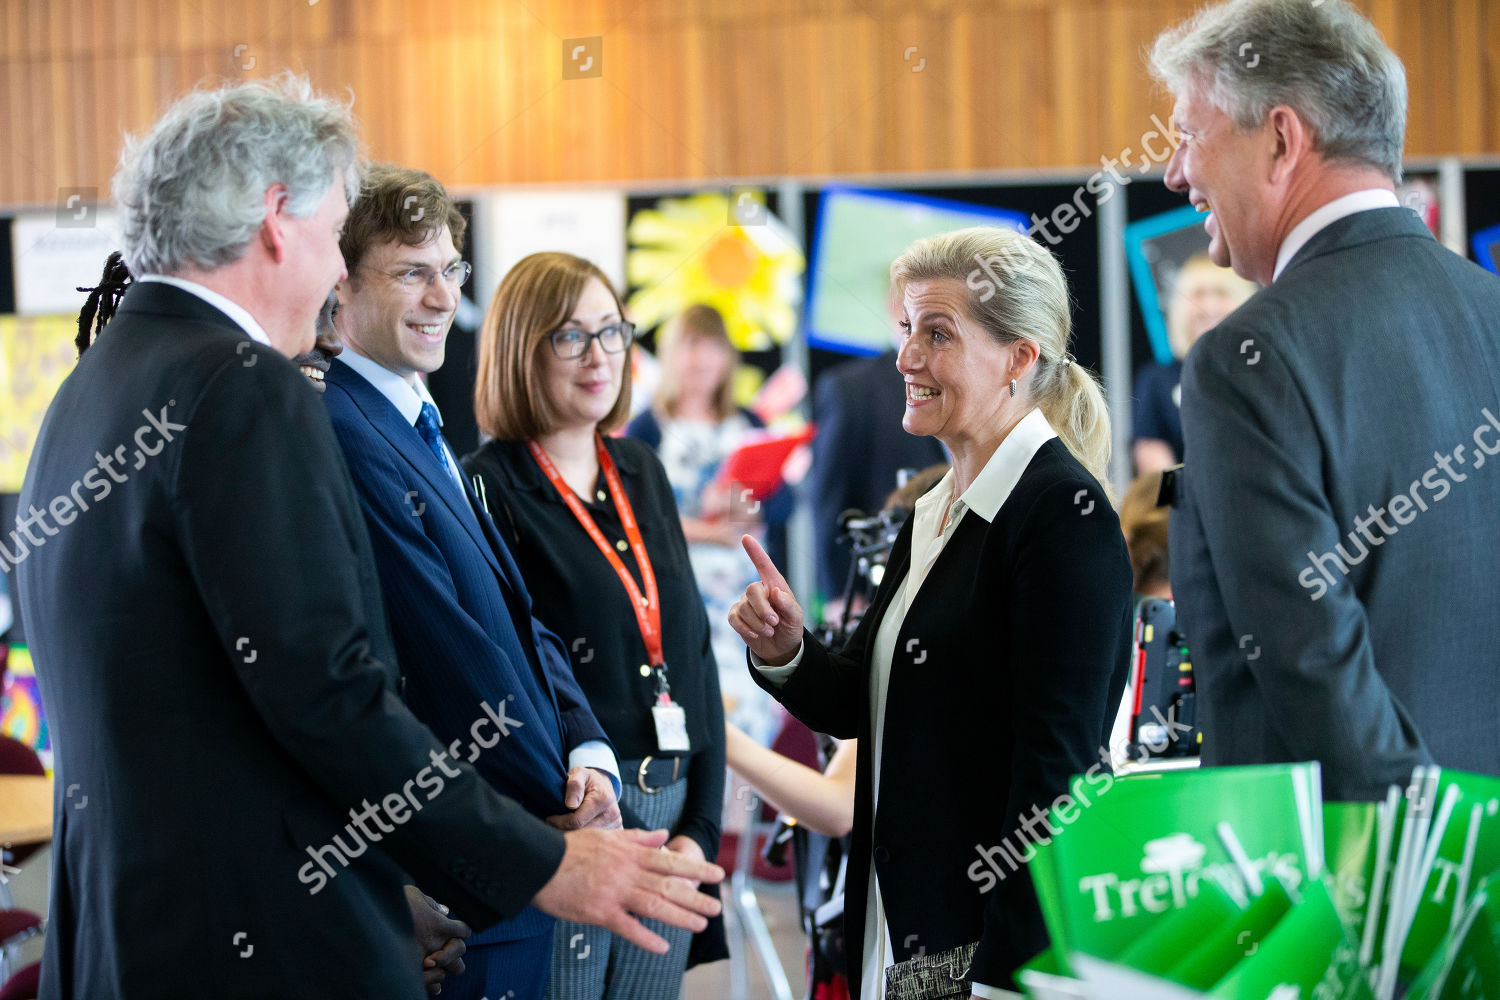 sophie-countess-of-wessex-visits-the-treloar-trust-college-holybourne-uk-shutterstock-editorial-10279529l.jpg